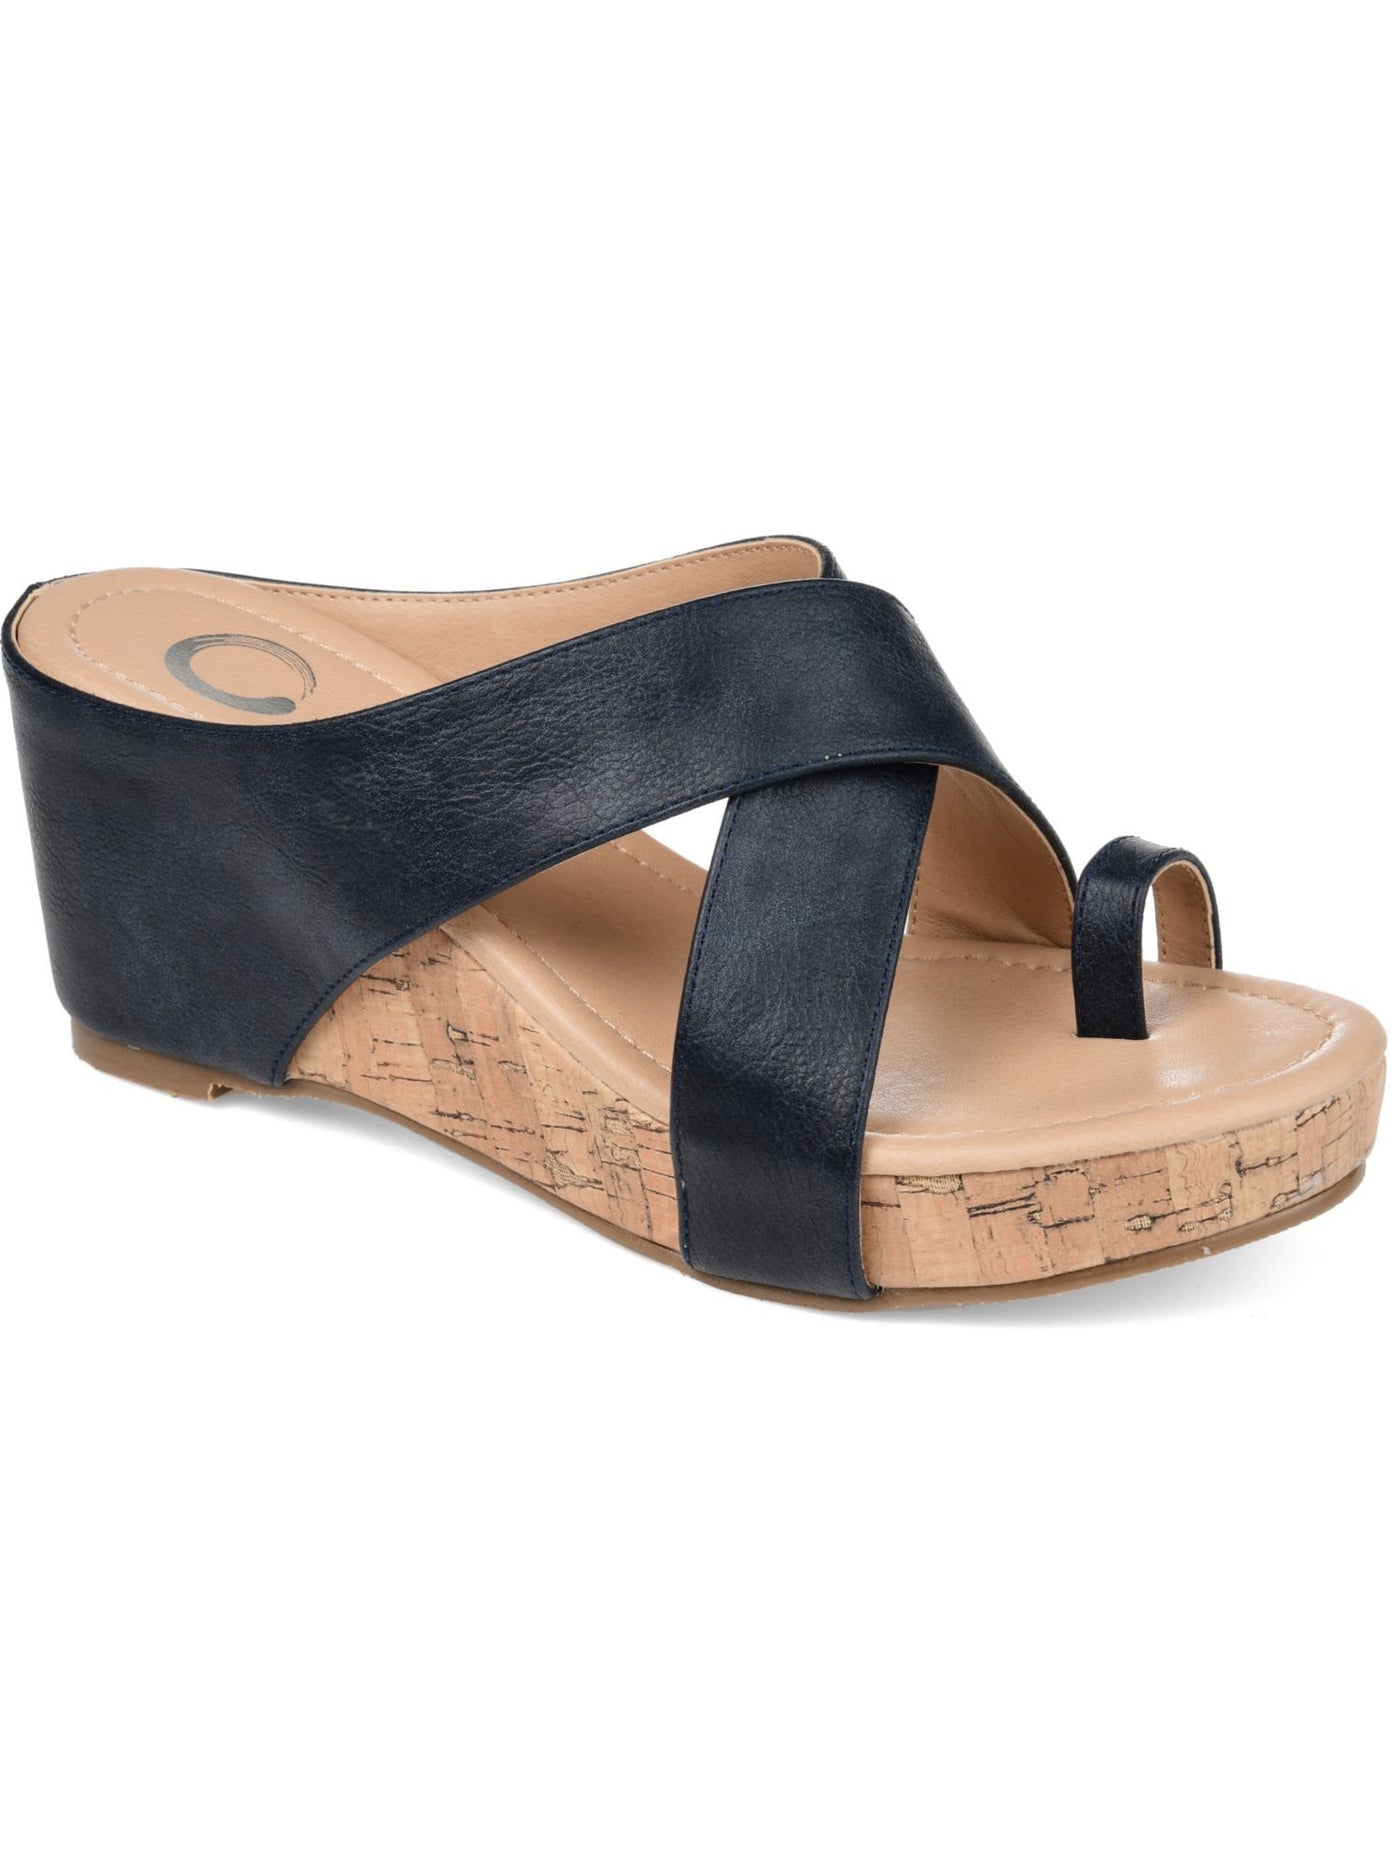 JOURNEE COLLECTION Womens Navy Crisscross Design Toe Loop Detail Cork-Like Cushioned Open Back Shoe Rayna Round Toe Wedge Slip On Sandals Shoes 6.5